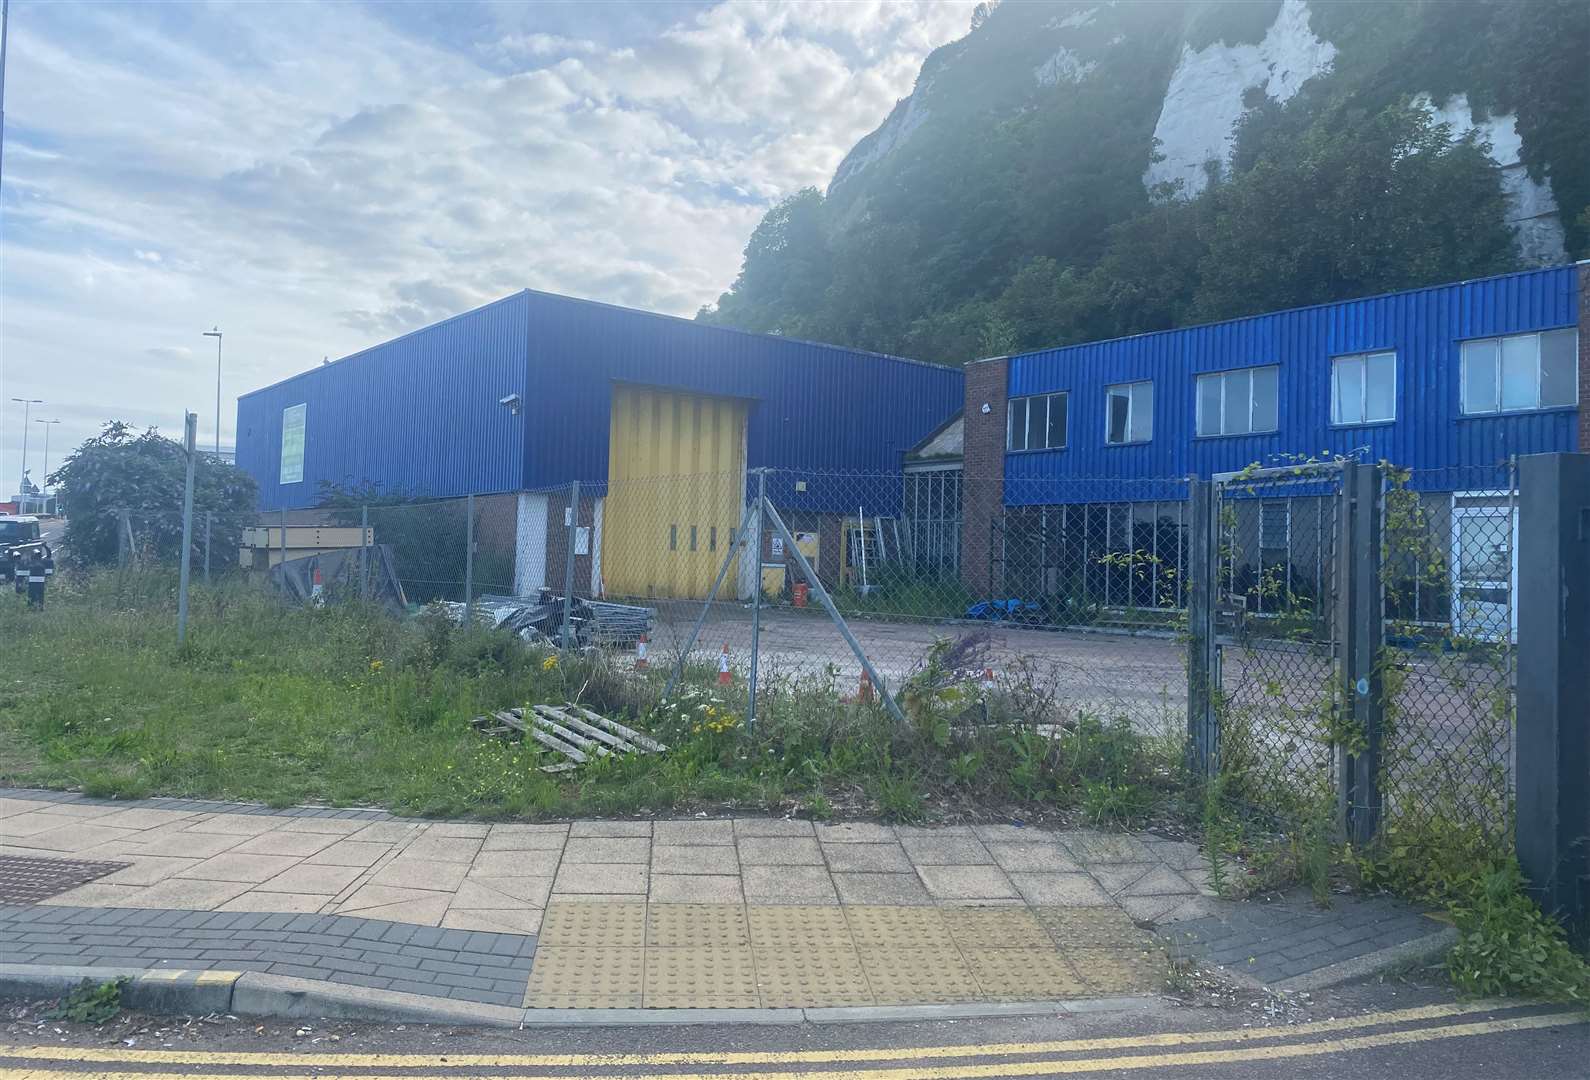 The distinctive blue warehouse buildings in Snargate Street, Dover, photographed last month, are now gone to make way for the new Costa Coffee outlet